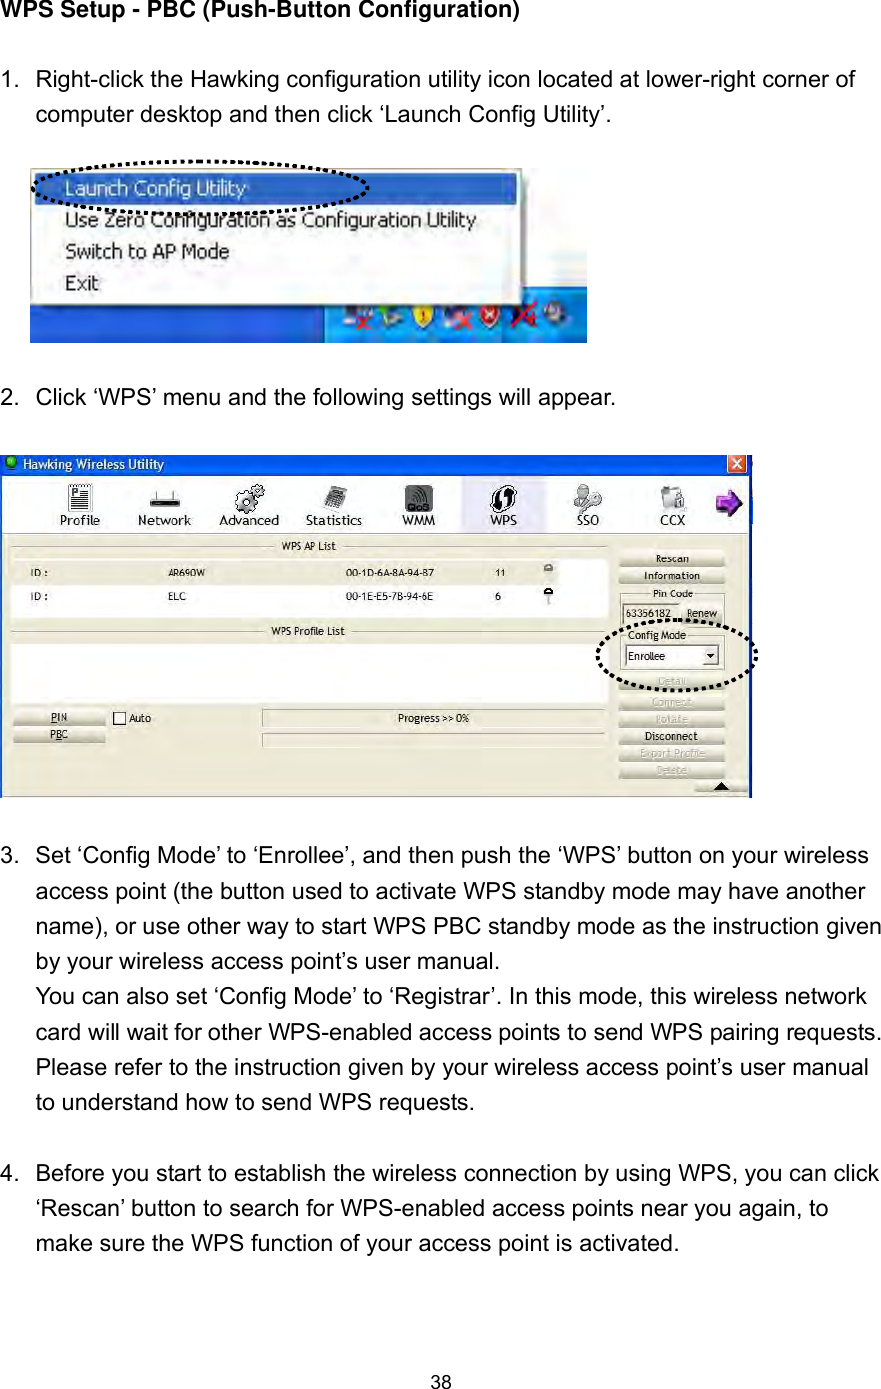  38  WPS Setup - PBC (Push-Button Configuration)  1.  Right-click the Hawking configuration utility icon located at lower-right corner of computer desktop and then click ‘Launch Config Utility’.    2.  Click ‘WPS’ menu and the following settings will appear.    3.  Set ‘Config Mode’ to ‘Enrollee’, and then push the ‘WPS’ button on your wireless access point (the button used to activate WPS standby mode may have another name), or use other way to start WPS PBC standby mode as the instruction given by your wireless access point’s user manual. You can also set ‘Config Mode’ to ‘Registrar’. In this mode, this wireless network card will wait for other WPS-enabled access points to send WPS pairing requests. Please refer to the instruction given by your wireless access point’s user manual to understand how to send WPS requests.  4.  Before you start to establish the wireless connection by using WPS, you can click ‘Rescan’ button to search for WPS-enabled access points near you again, to make sure the WPS function of your access point is activated.  